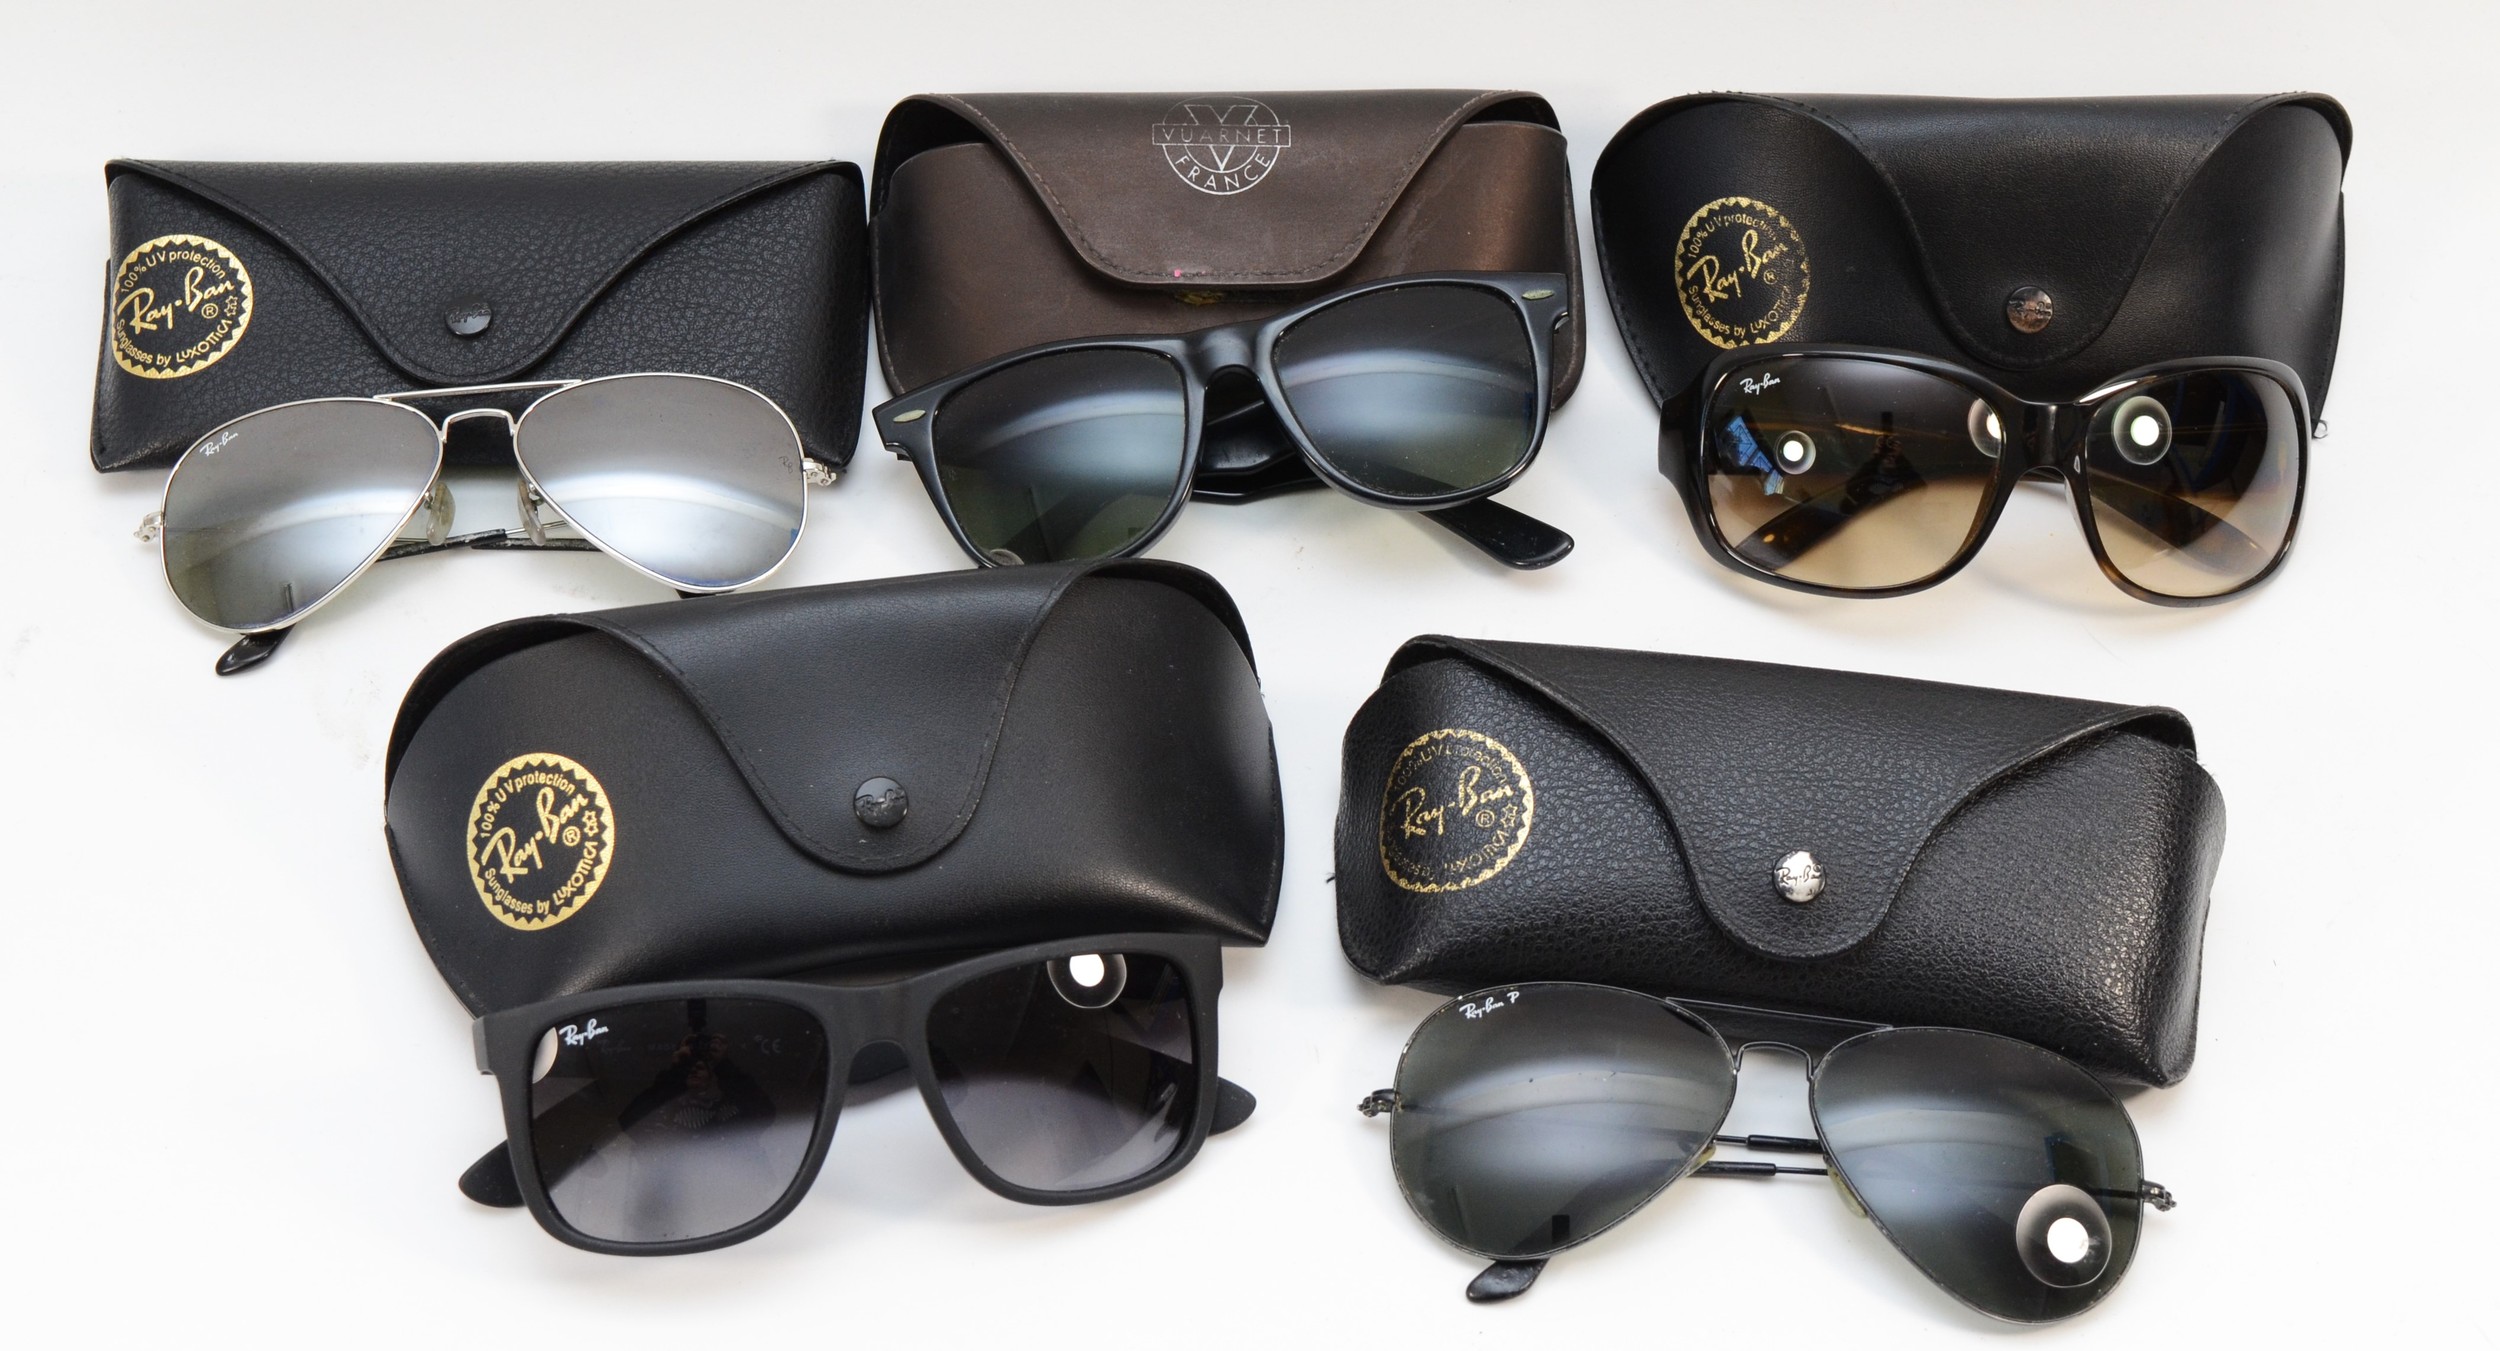 Five cased pairs of Ray-Ban sunglasses, two bearing model numbers - RB4118, RB4165, and one